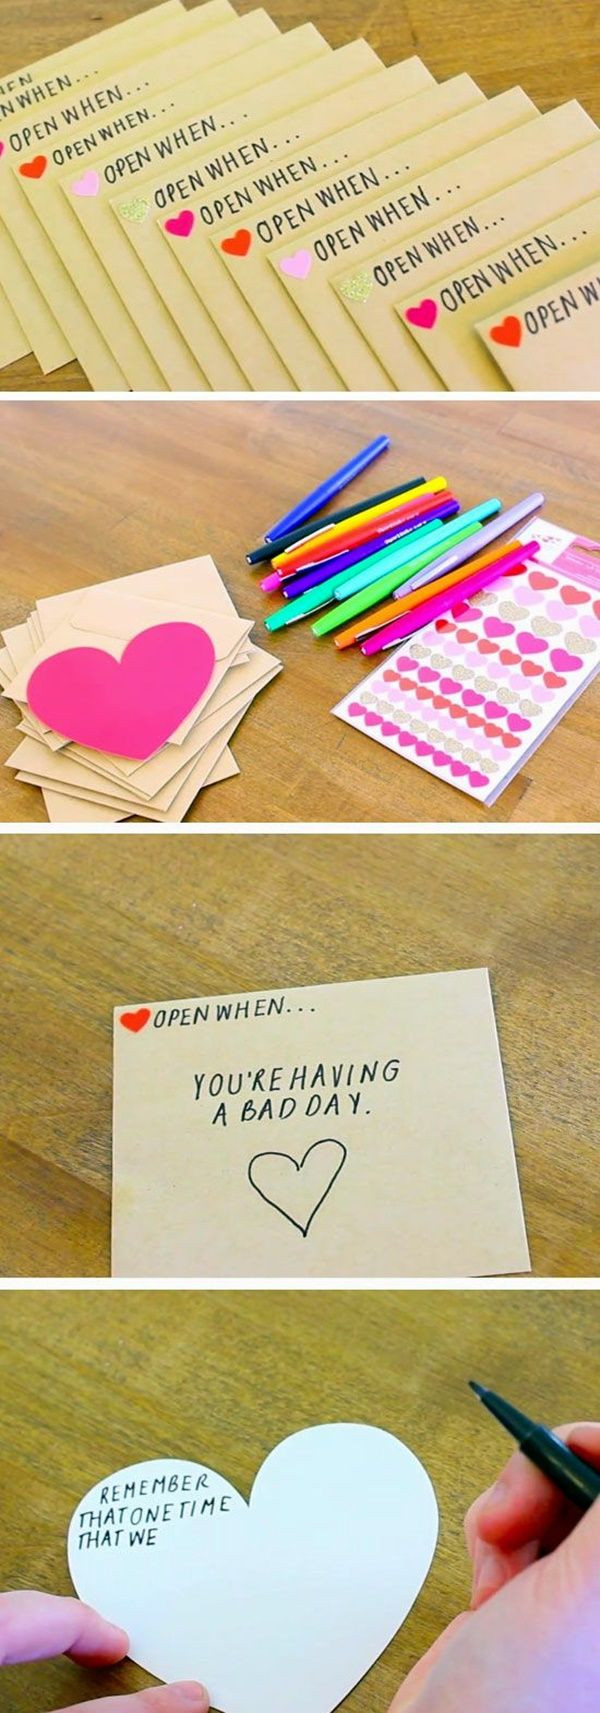 Valentines Gift Ideas For Him Homemade
 101 Homemade Valentines Day Ideas for Him that re really